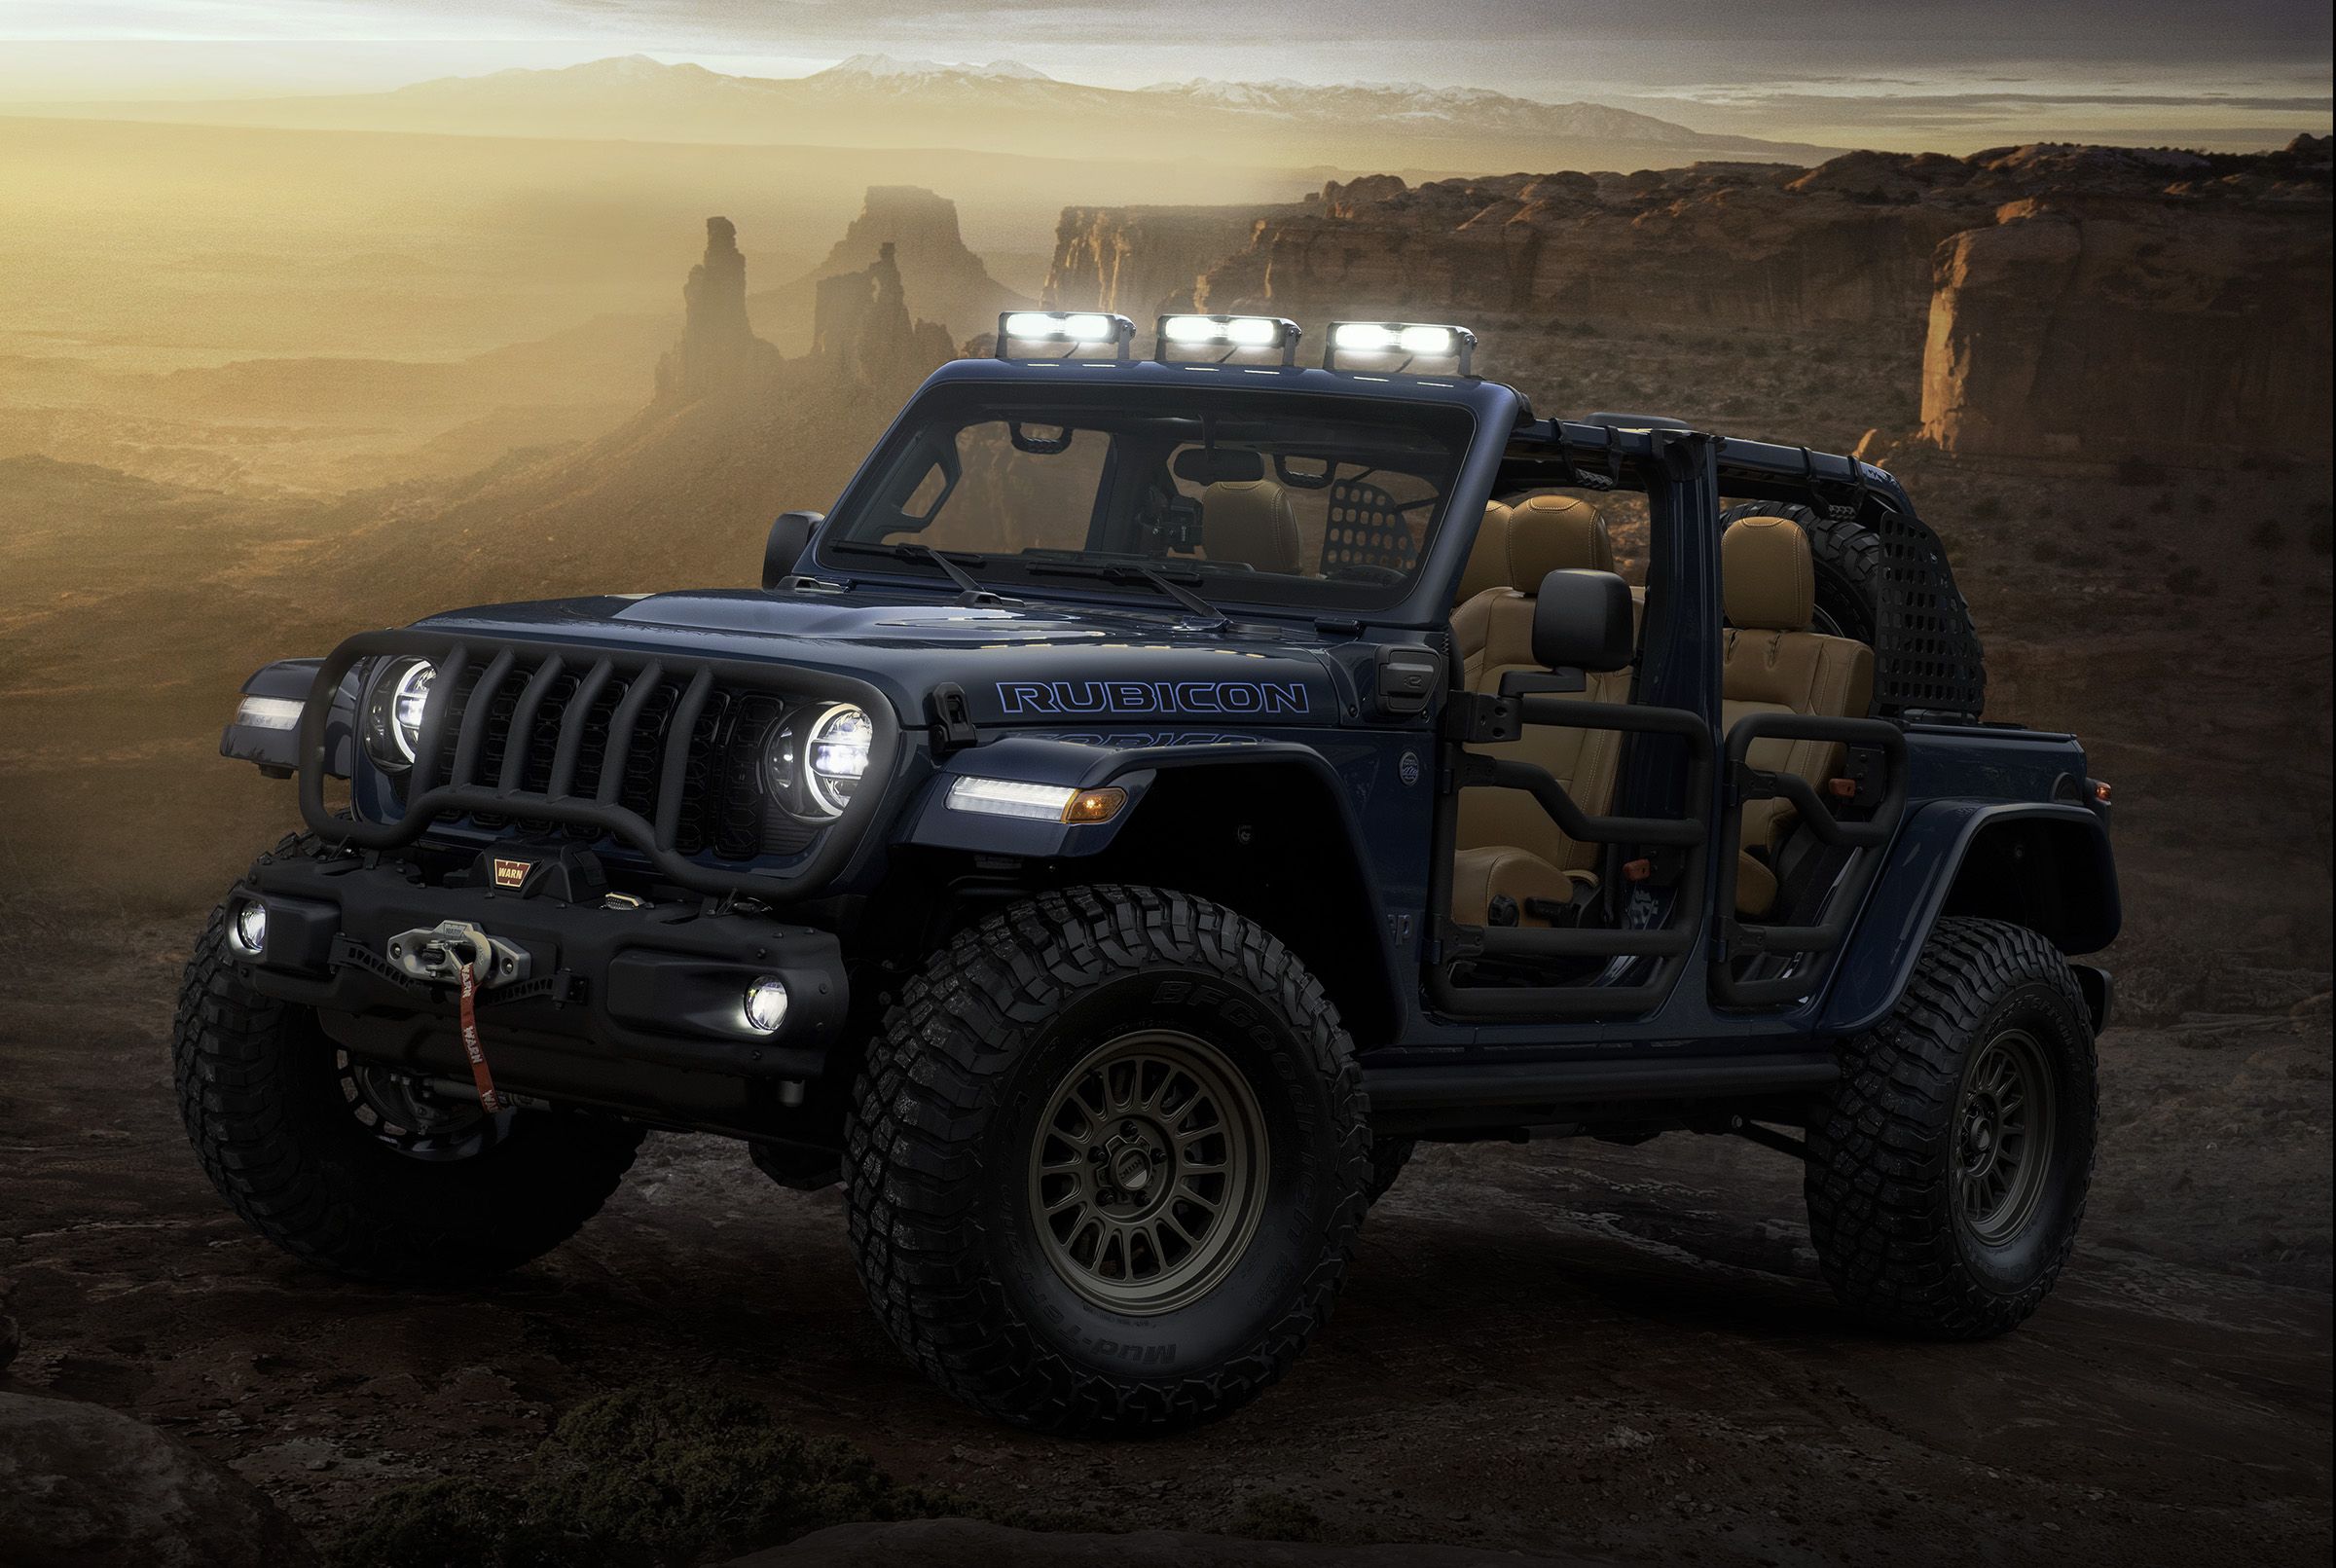 Jeep Dreams Up More Electric Rigs for Serious Off-Roaders